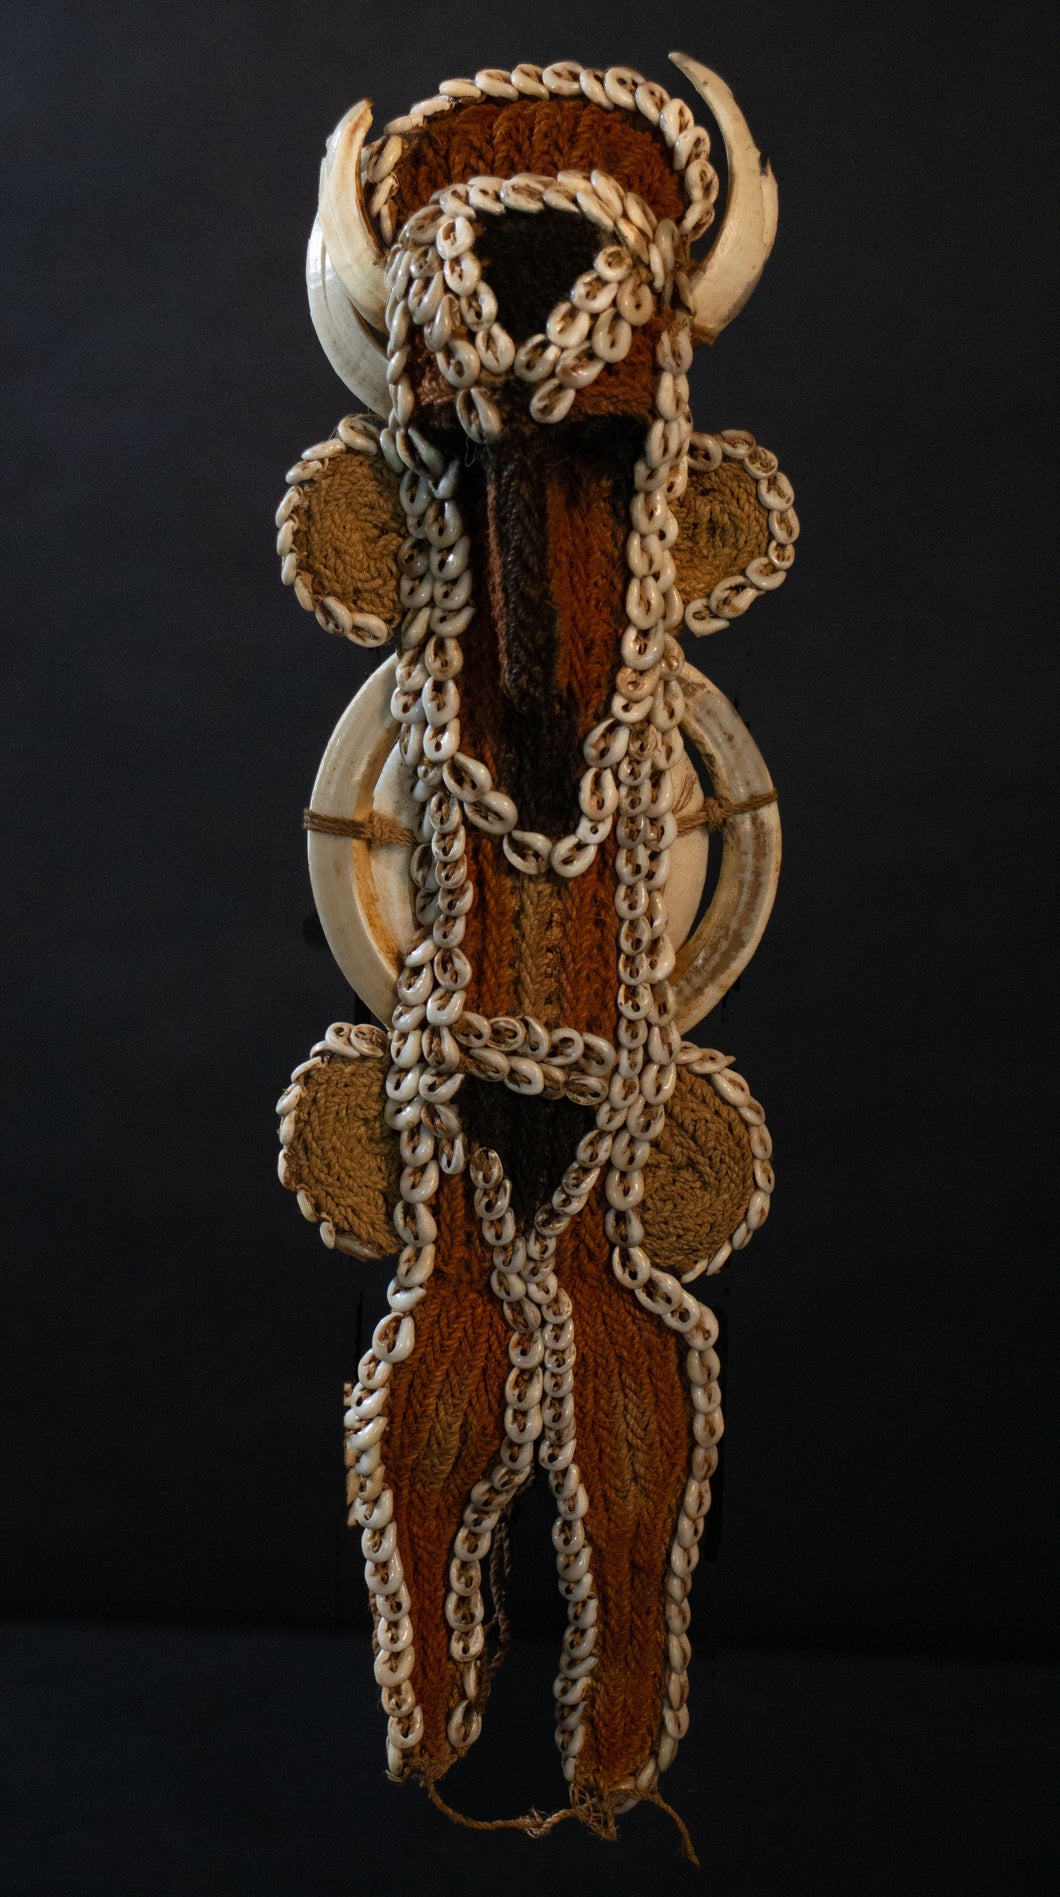 Woven Initiation Ornament with sewn-on cowrie shells. Maprik region, Papua New Guinea.